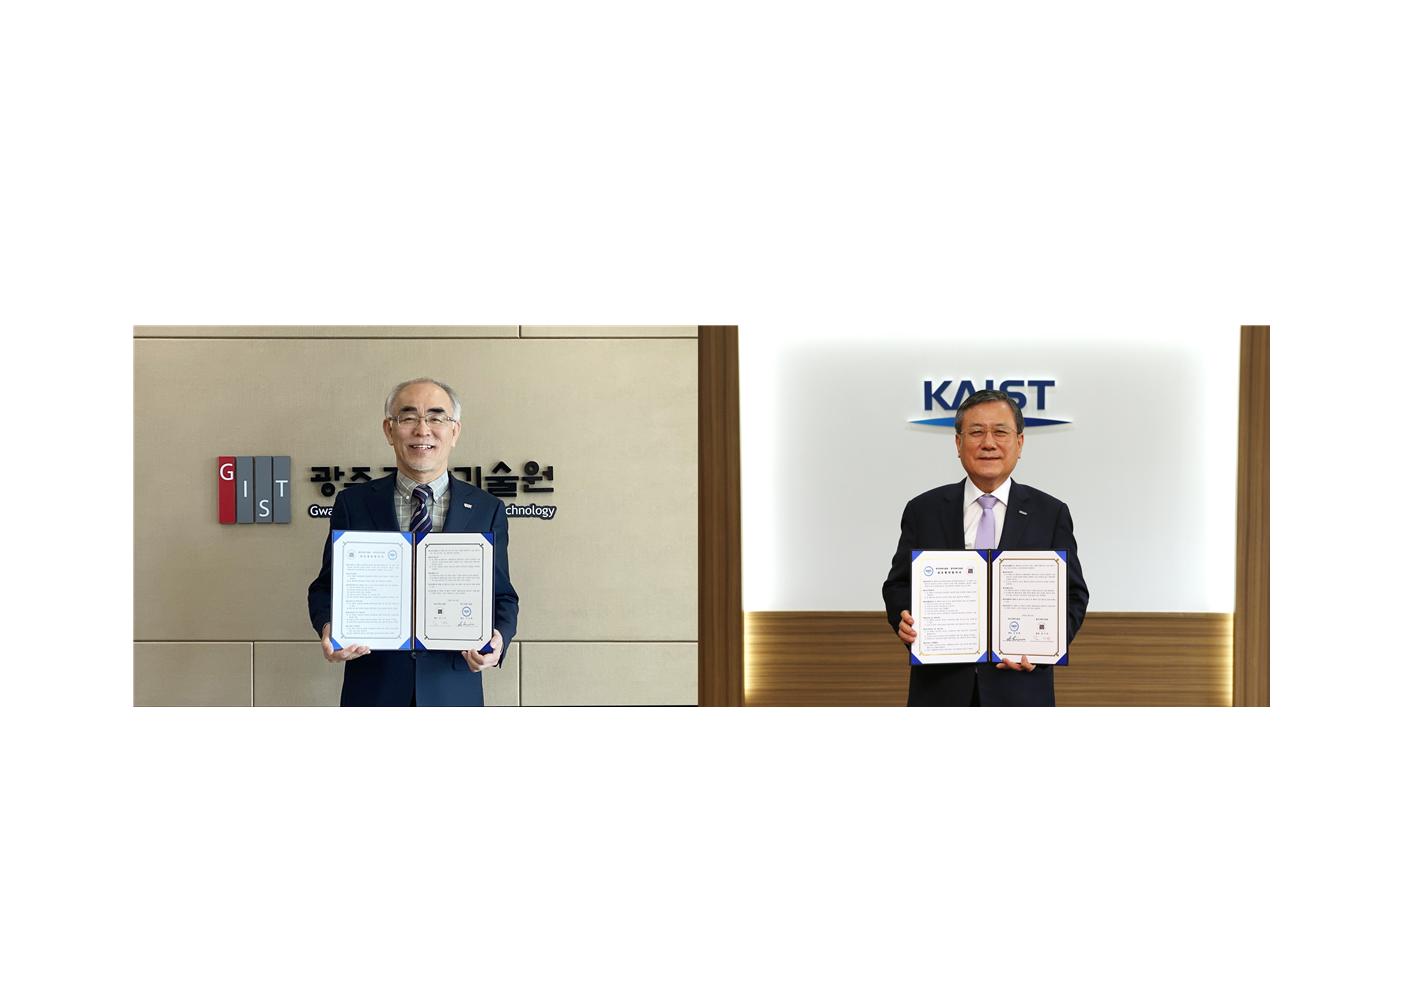 GIST and KAIST sign MoU for human resource development and international joint research projects 이미지